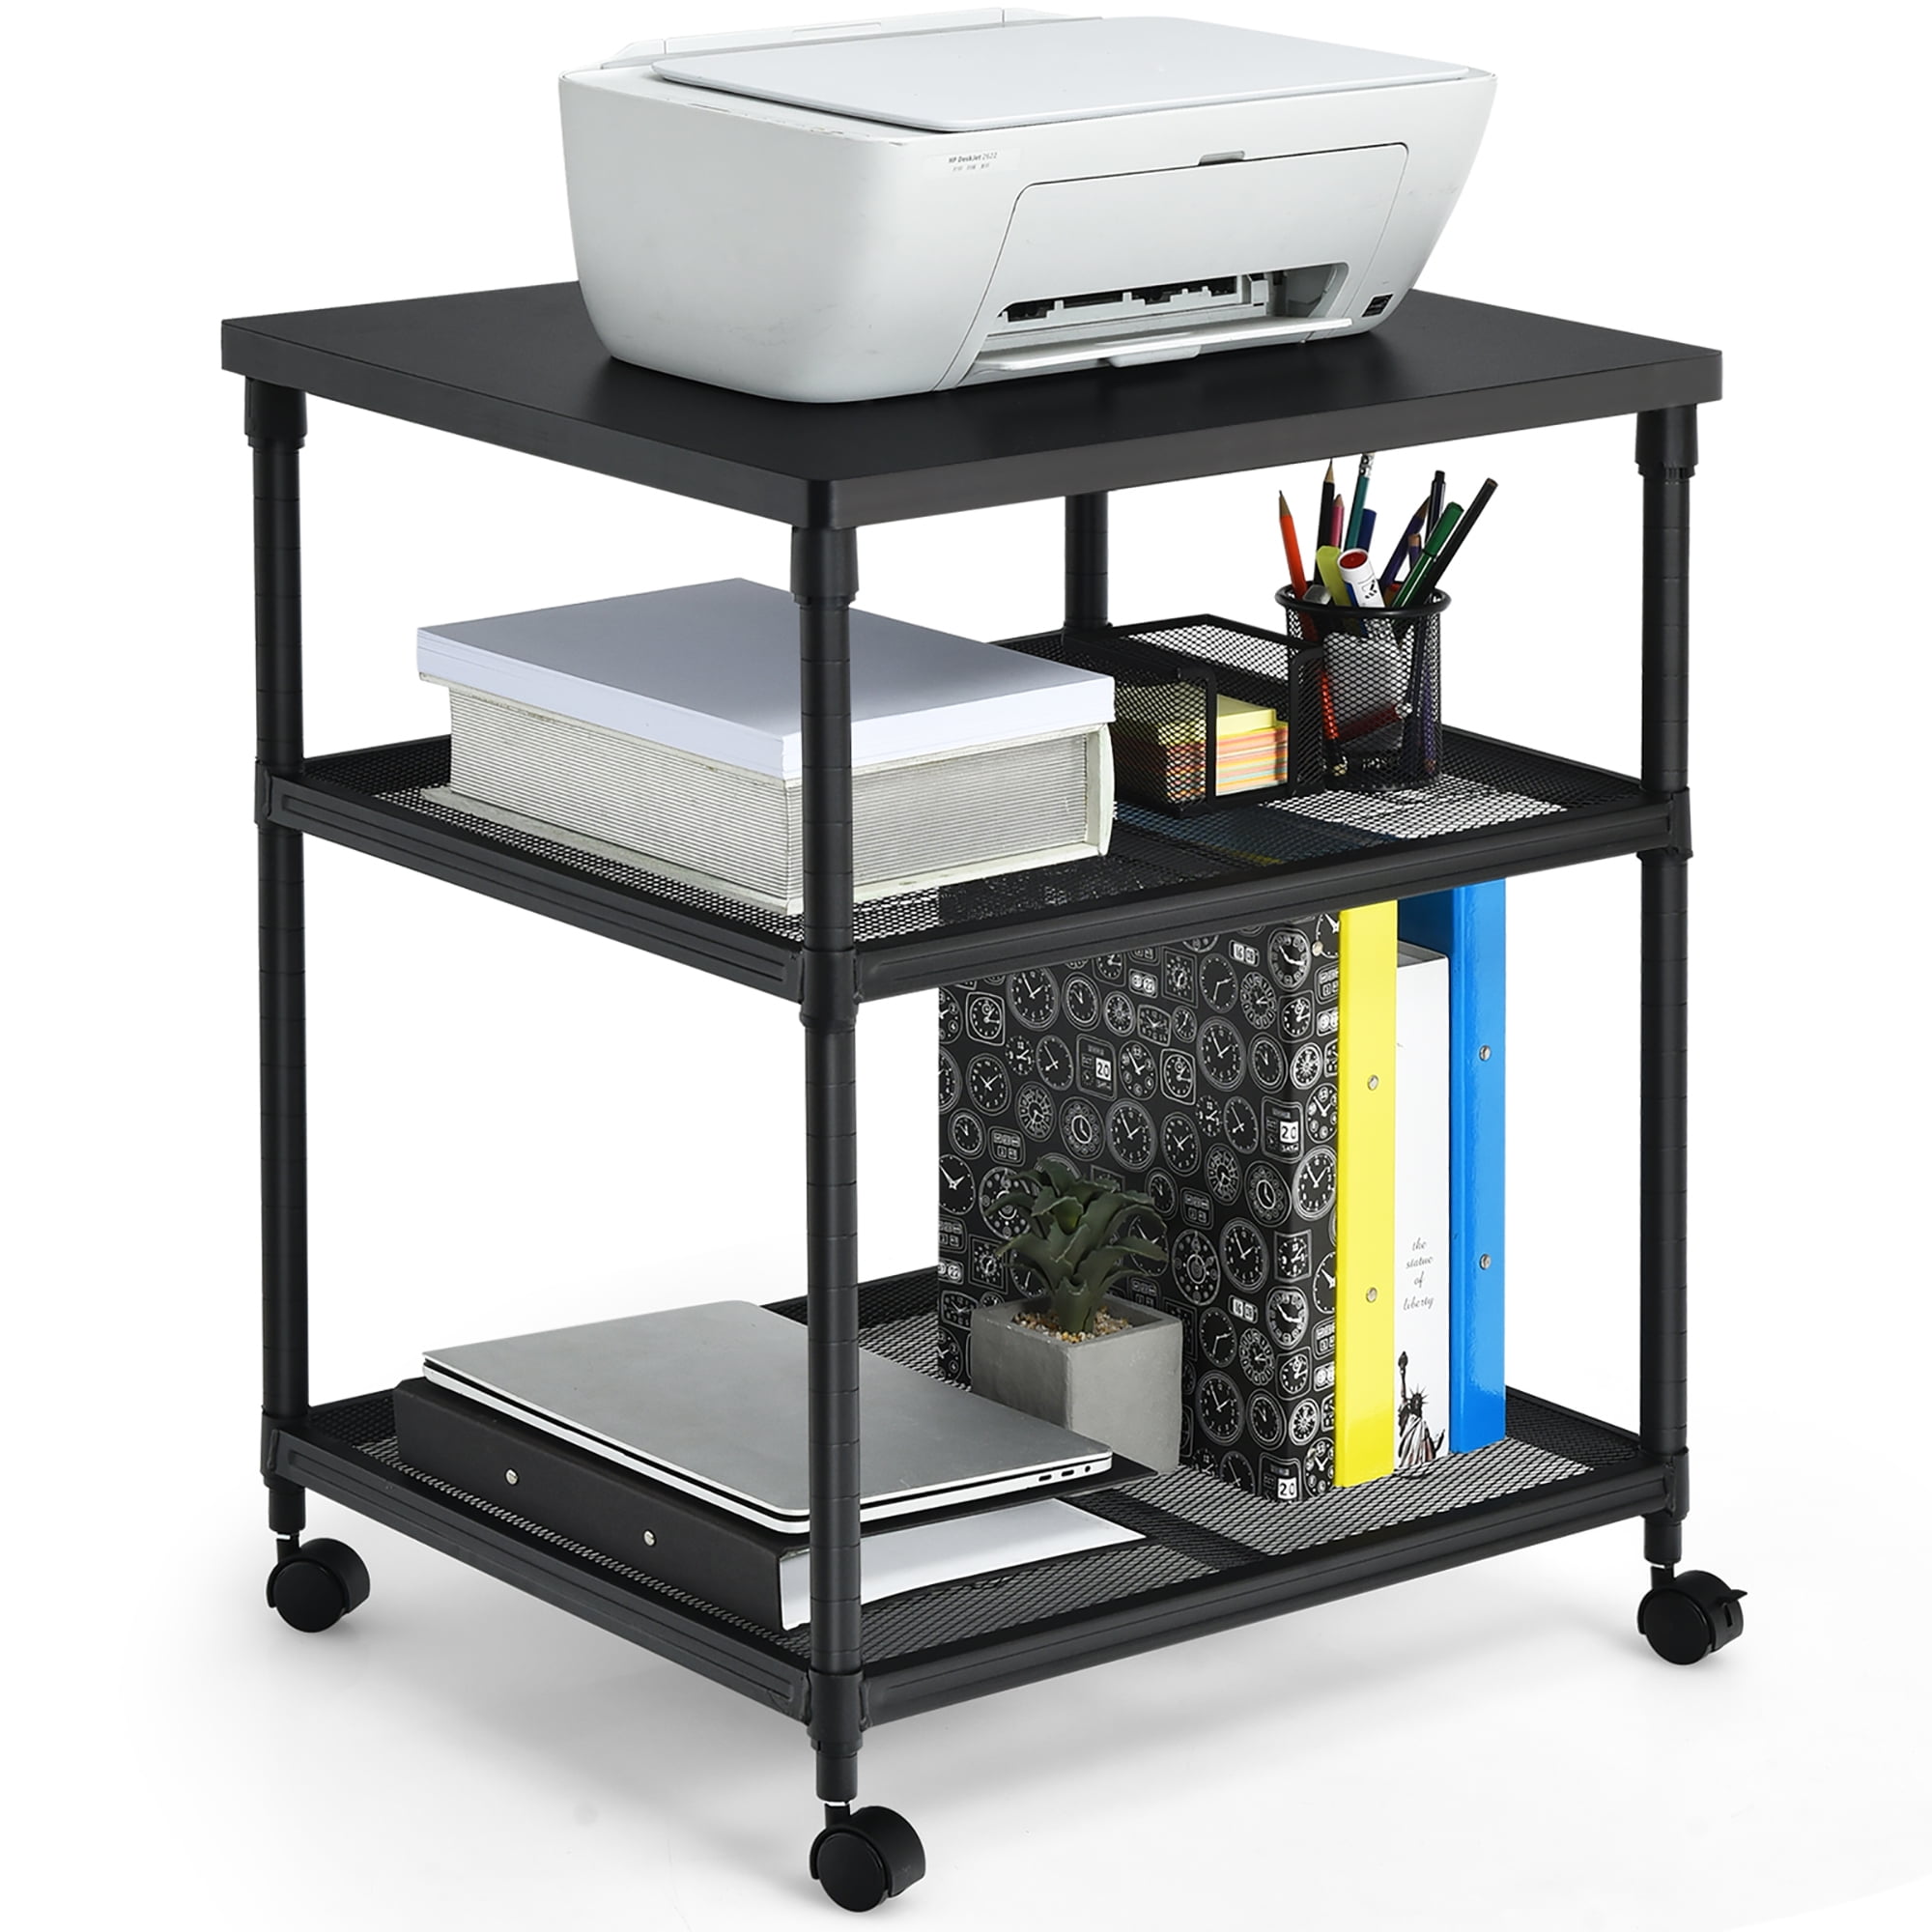 Multifunctional Desk Organizer for Fax Machine Scanner File Folder Mobile Printer Stand with Storage Drawer and Adjustable Shelf 3 Tier Printer Table Cart on Wheels for Home Office Black 